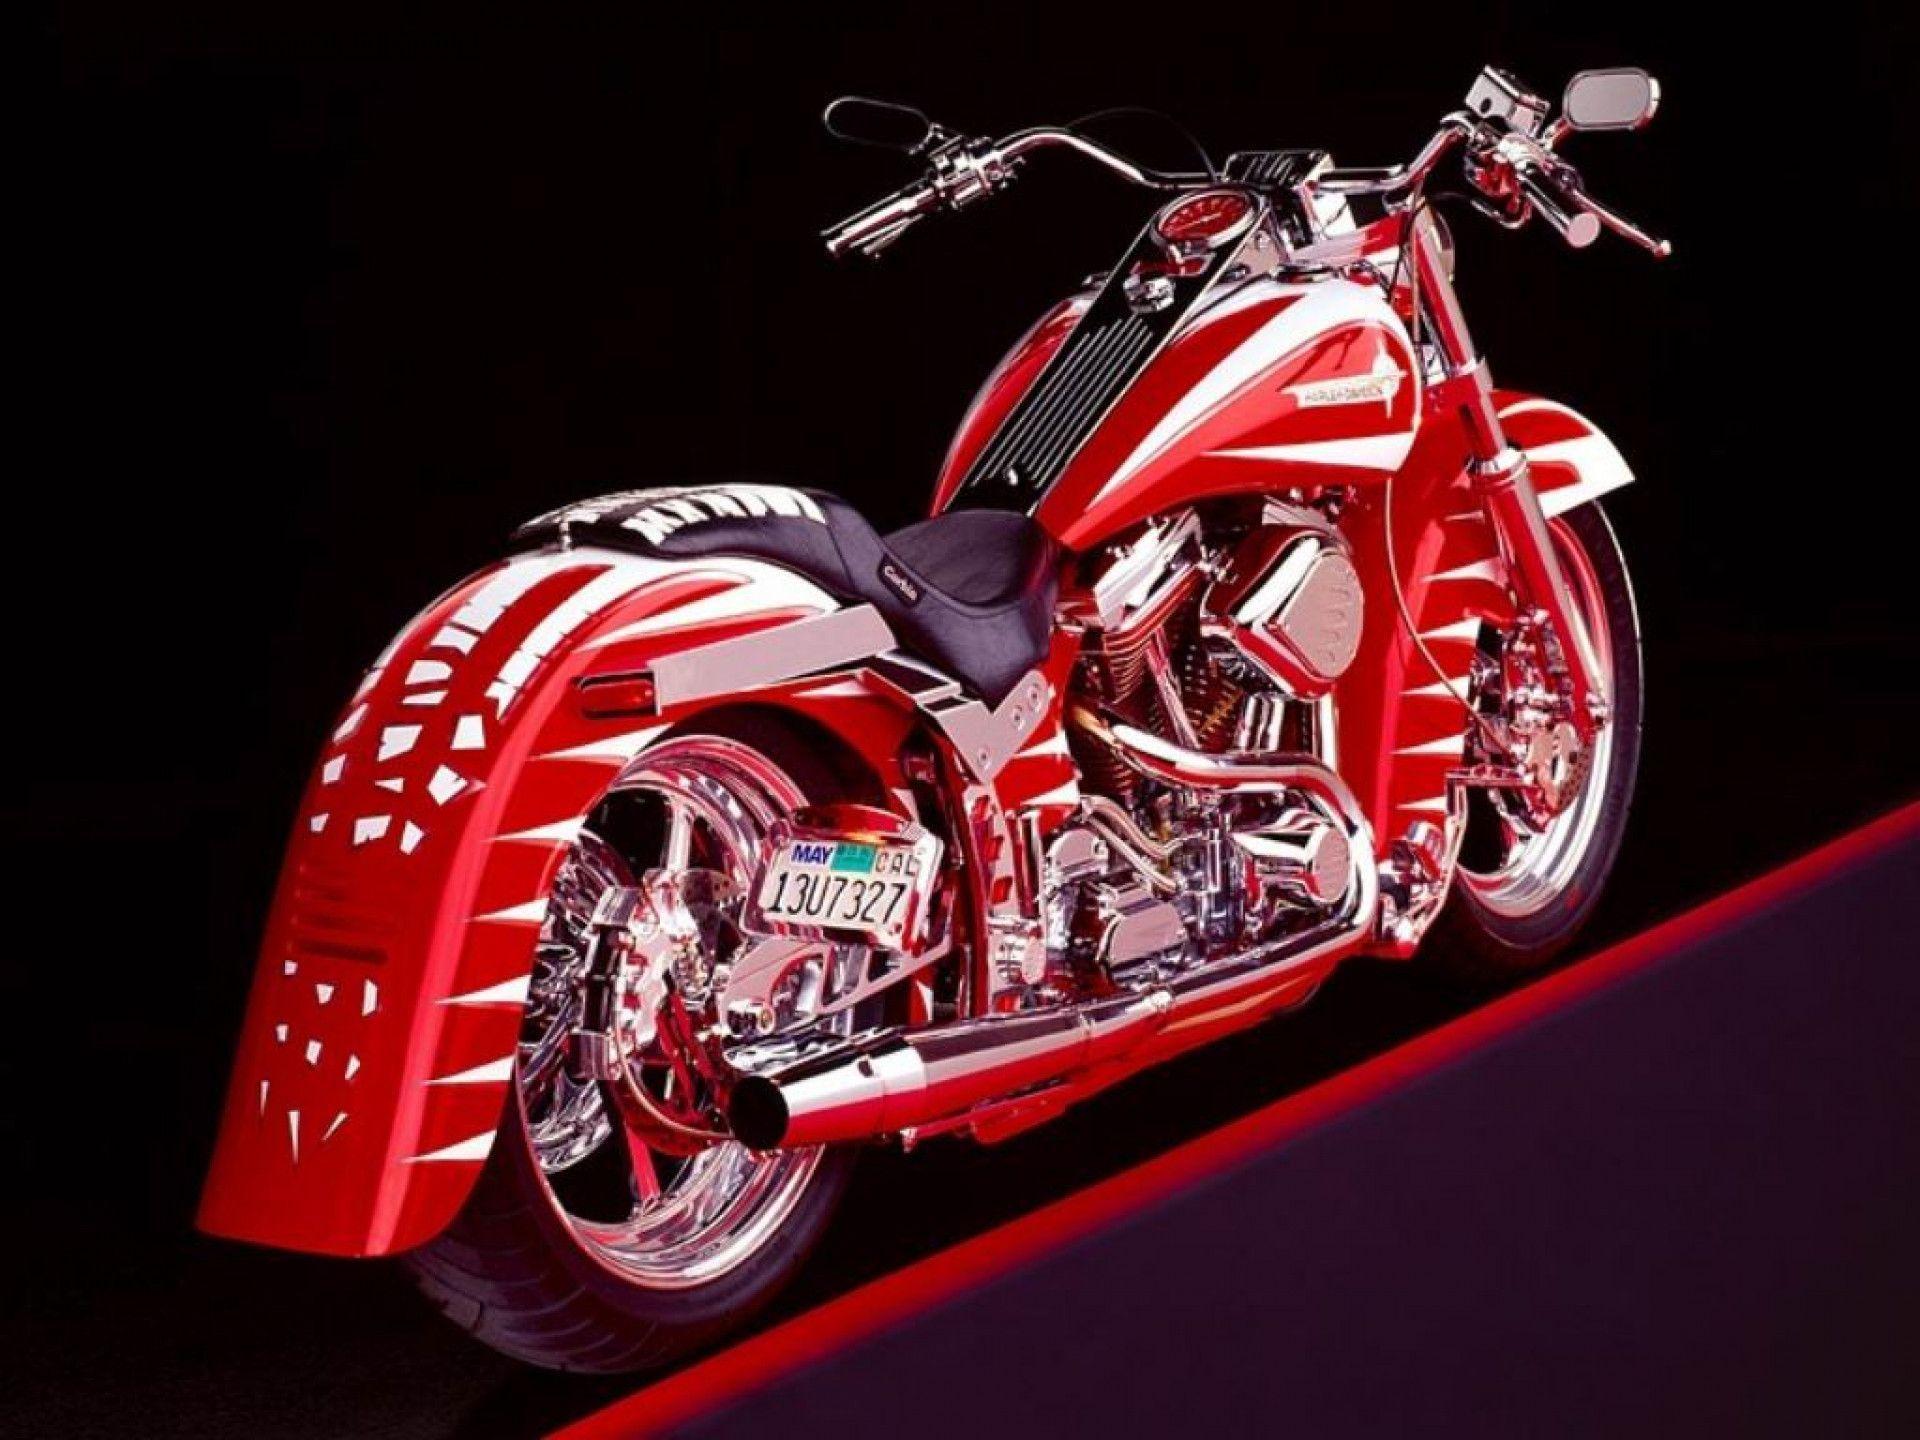 Free motorcycle wallpaper and picture harley davidson picture